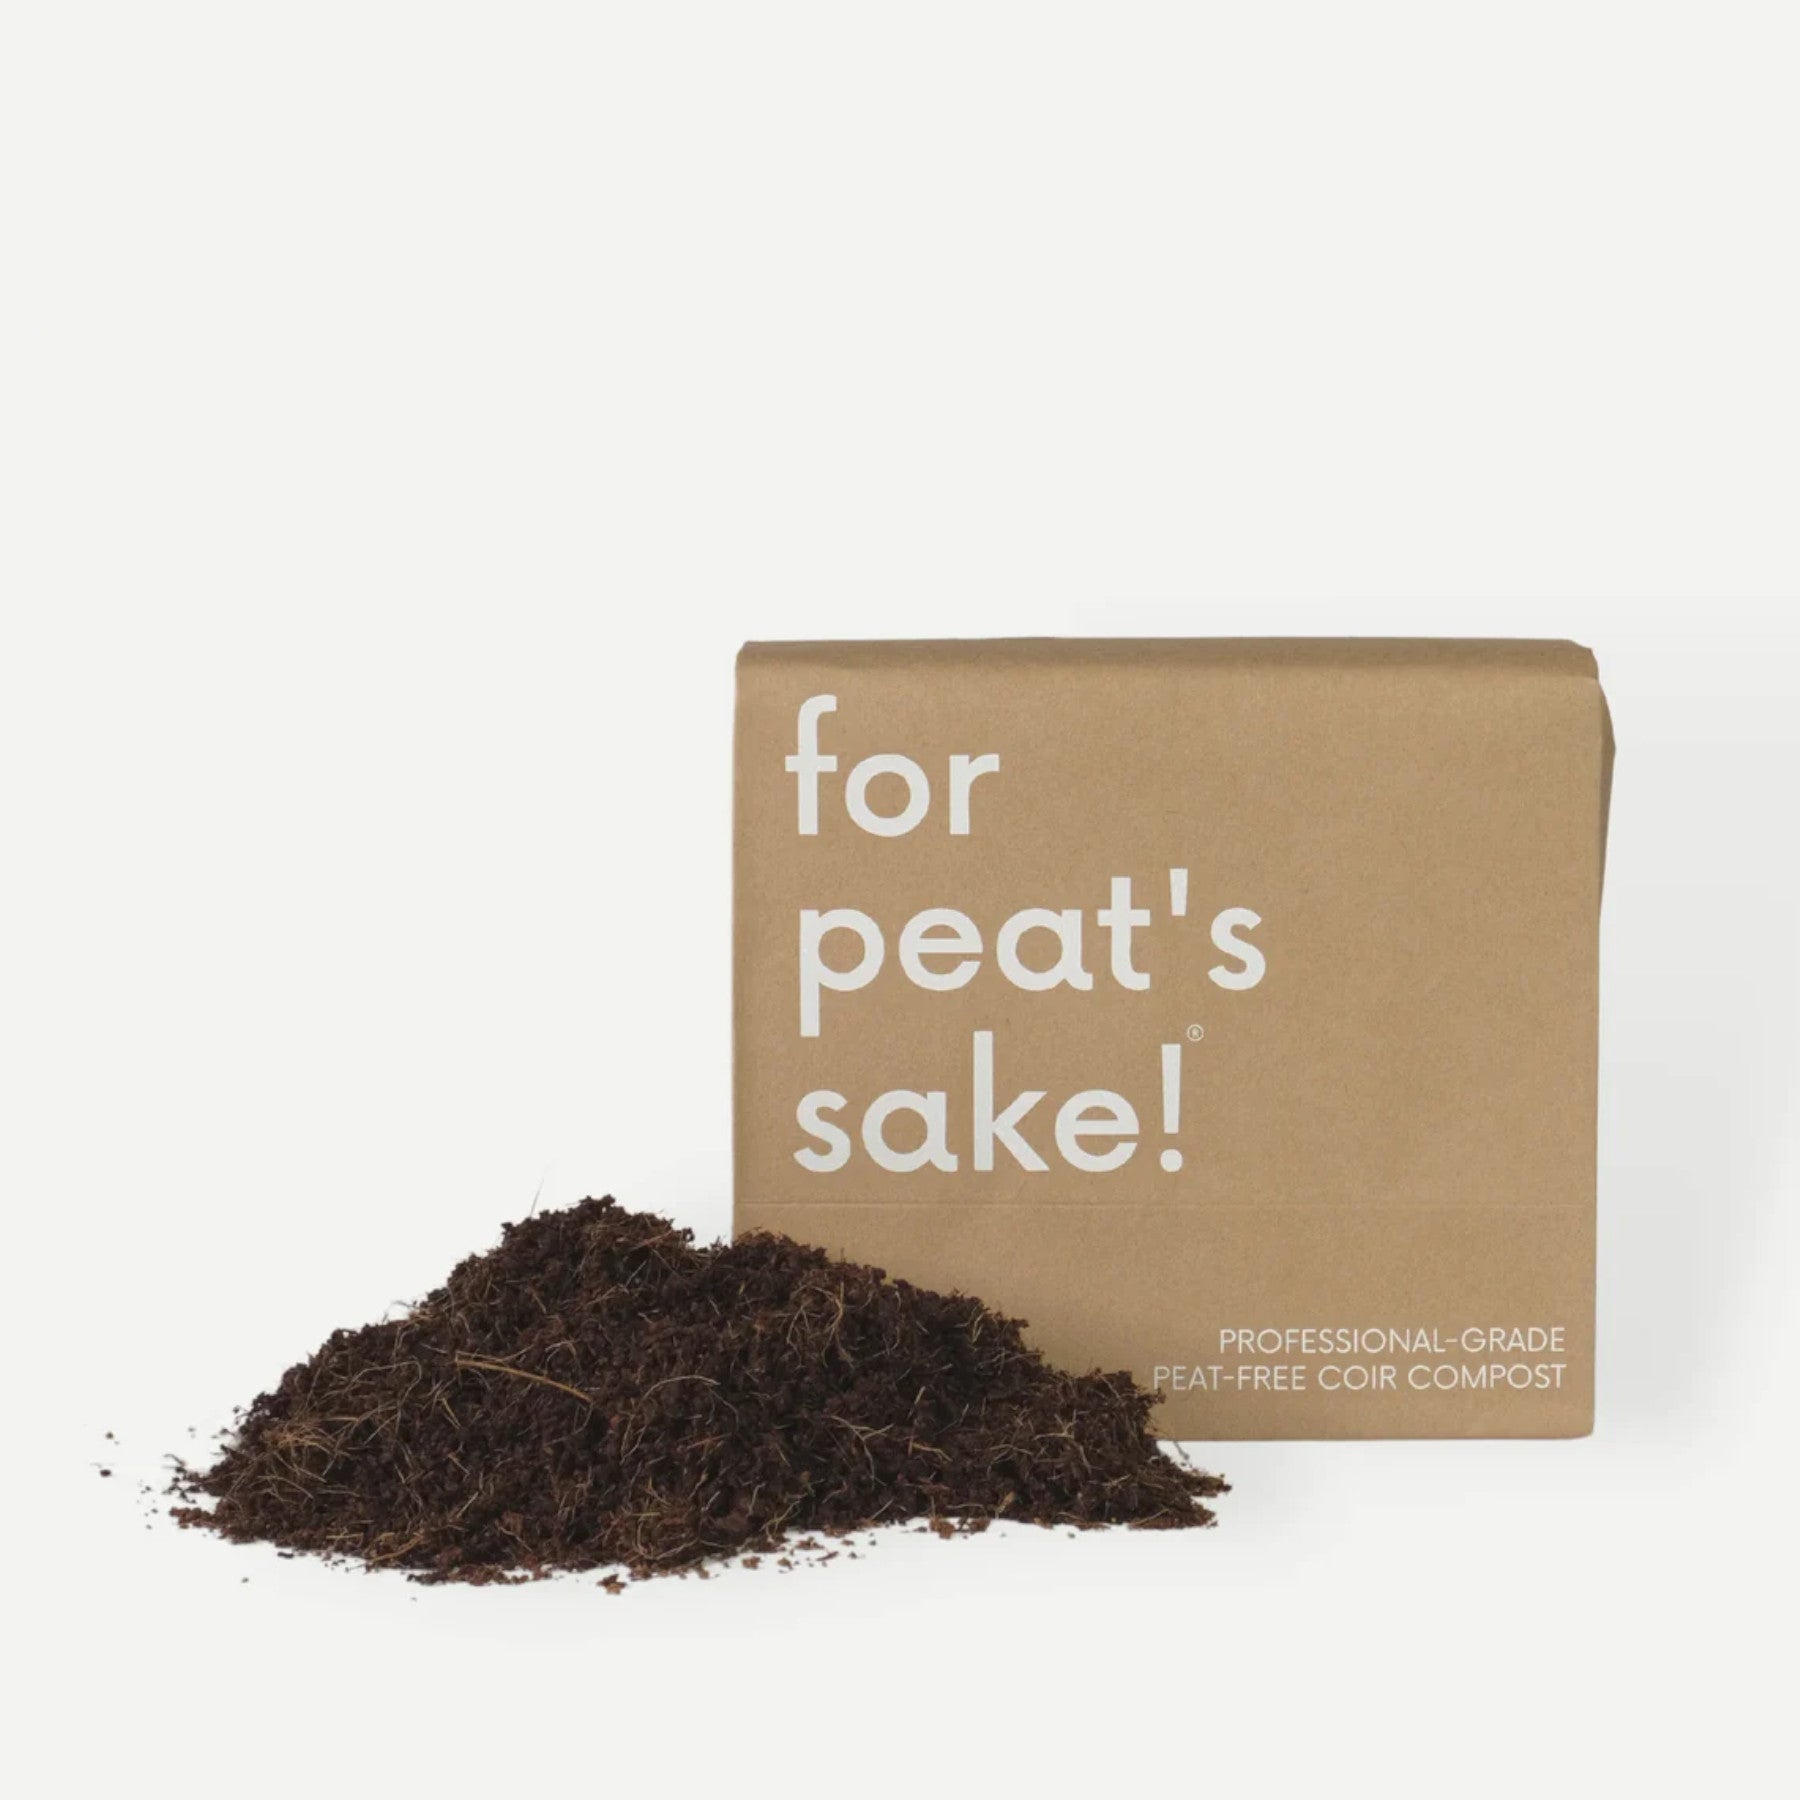 Eco-friendly peat-free coir compost with 'for peat's sake!' branding on cardboard packaging, professional-grade gardening product, isolated on white background.